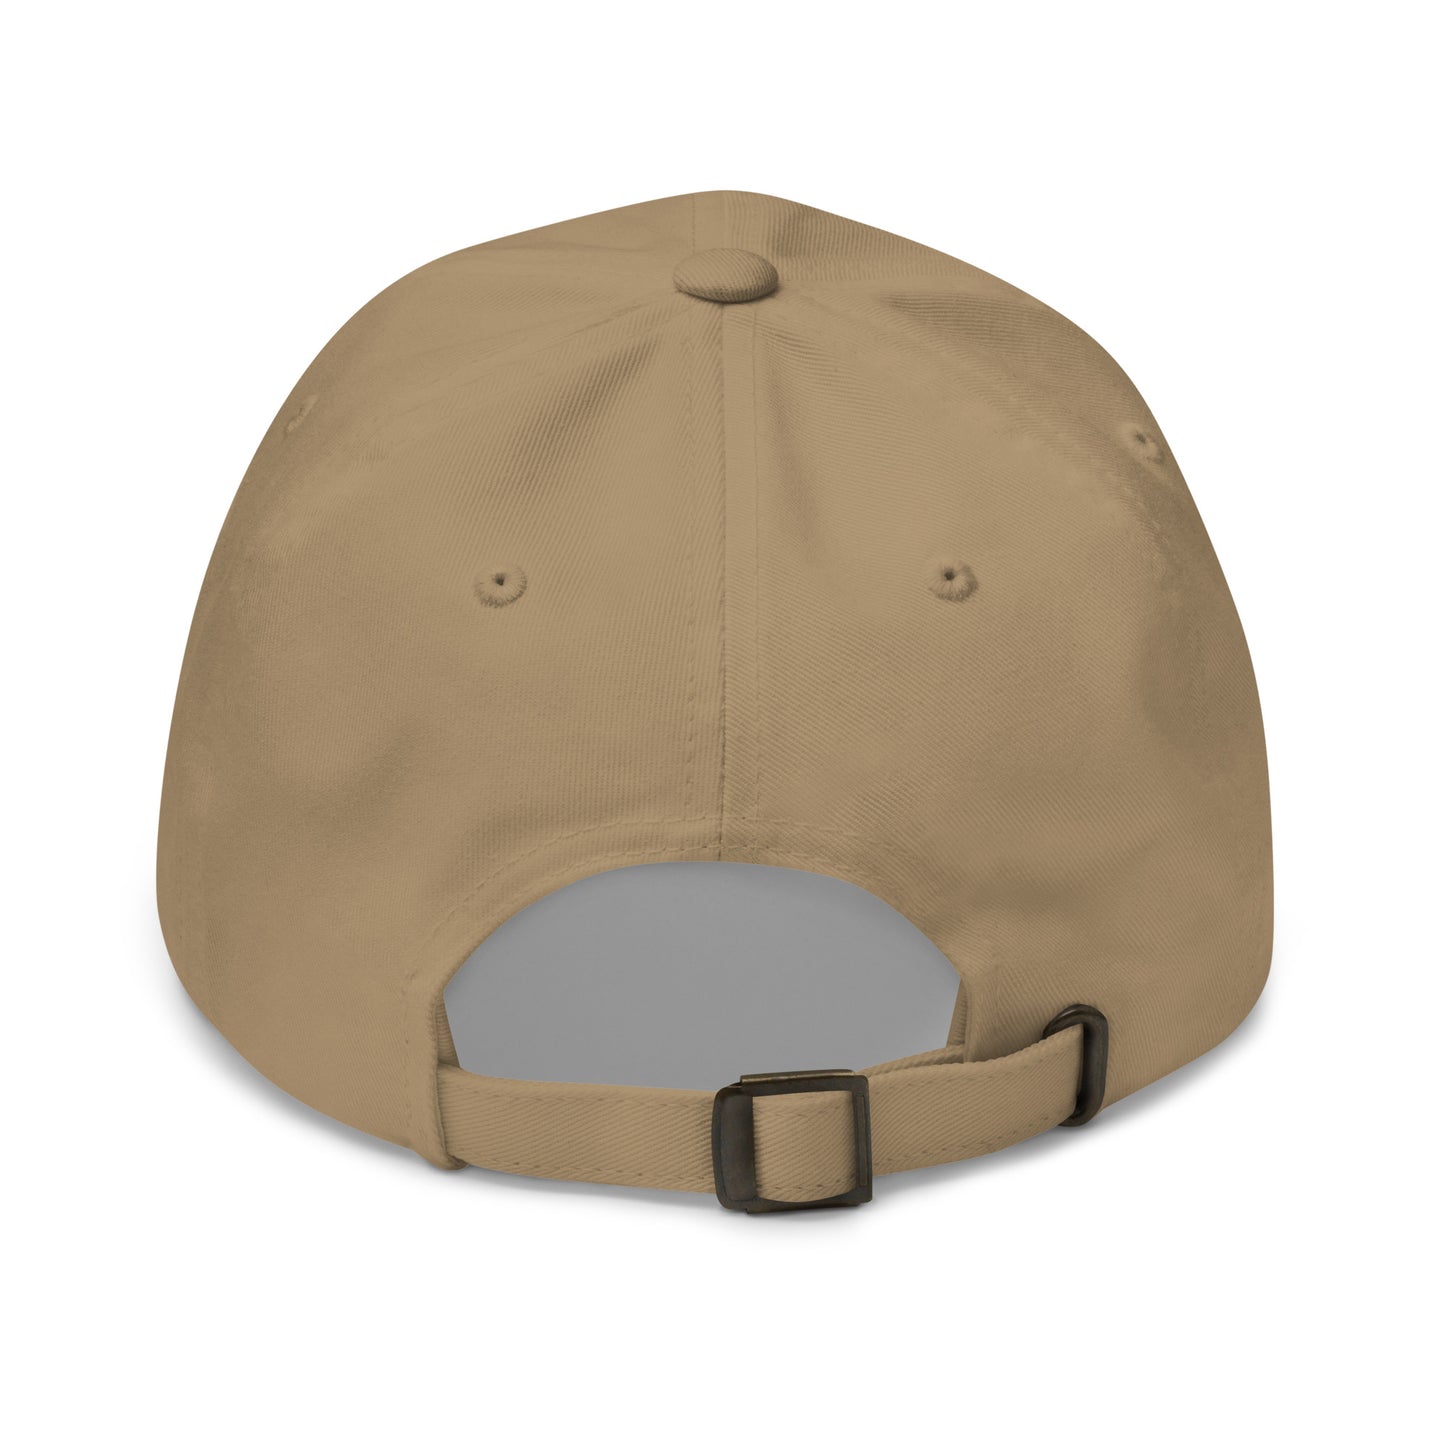 cap-from-the-back-with-kangaroo-symbol